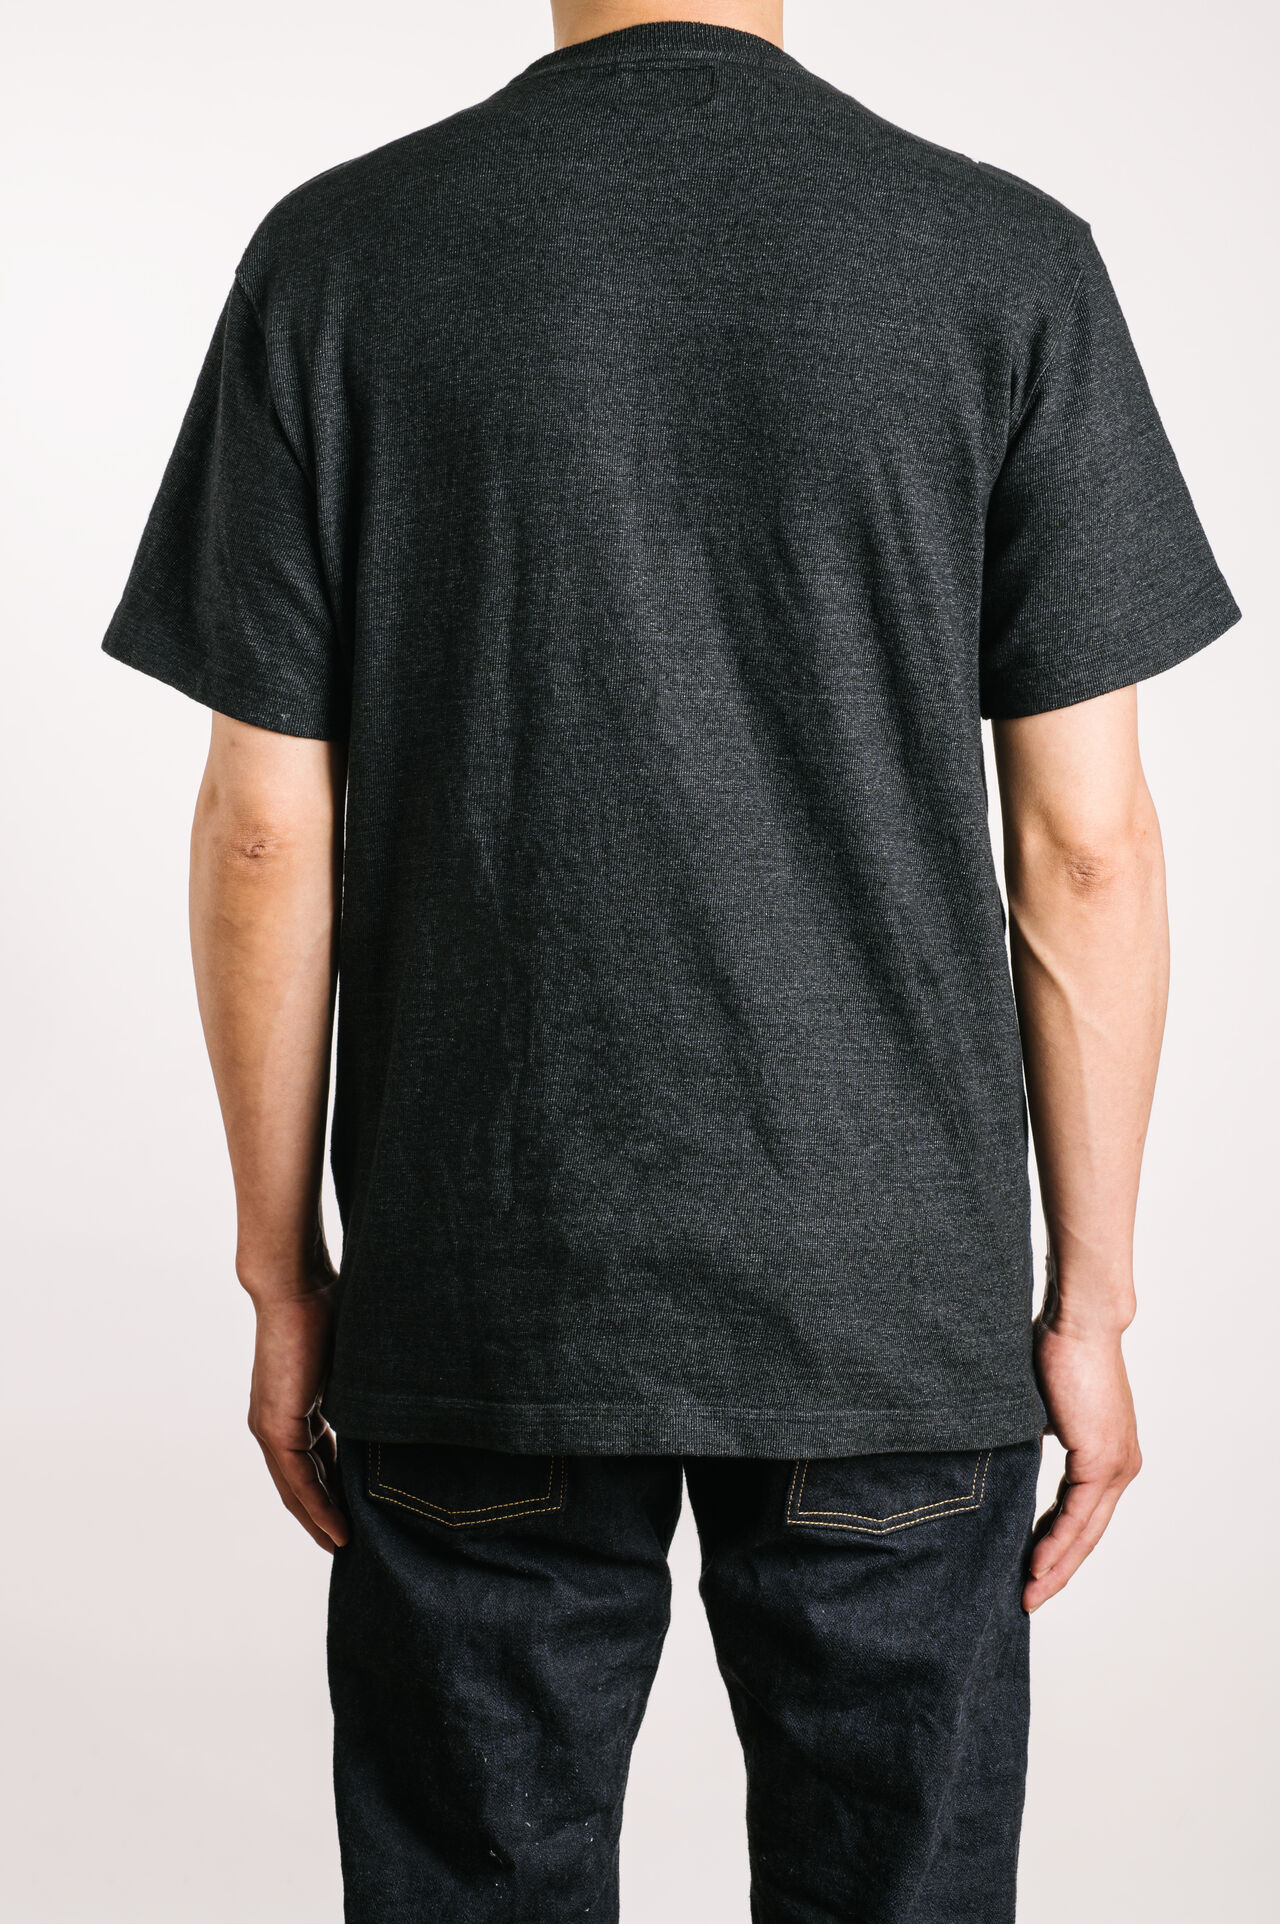 GY8714S HEAVY BLACK T-SHIRT (NATURAL SUMI INK DYE),, large image number 1